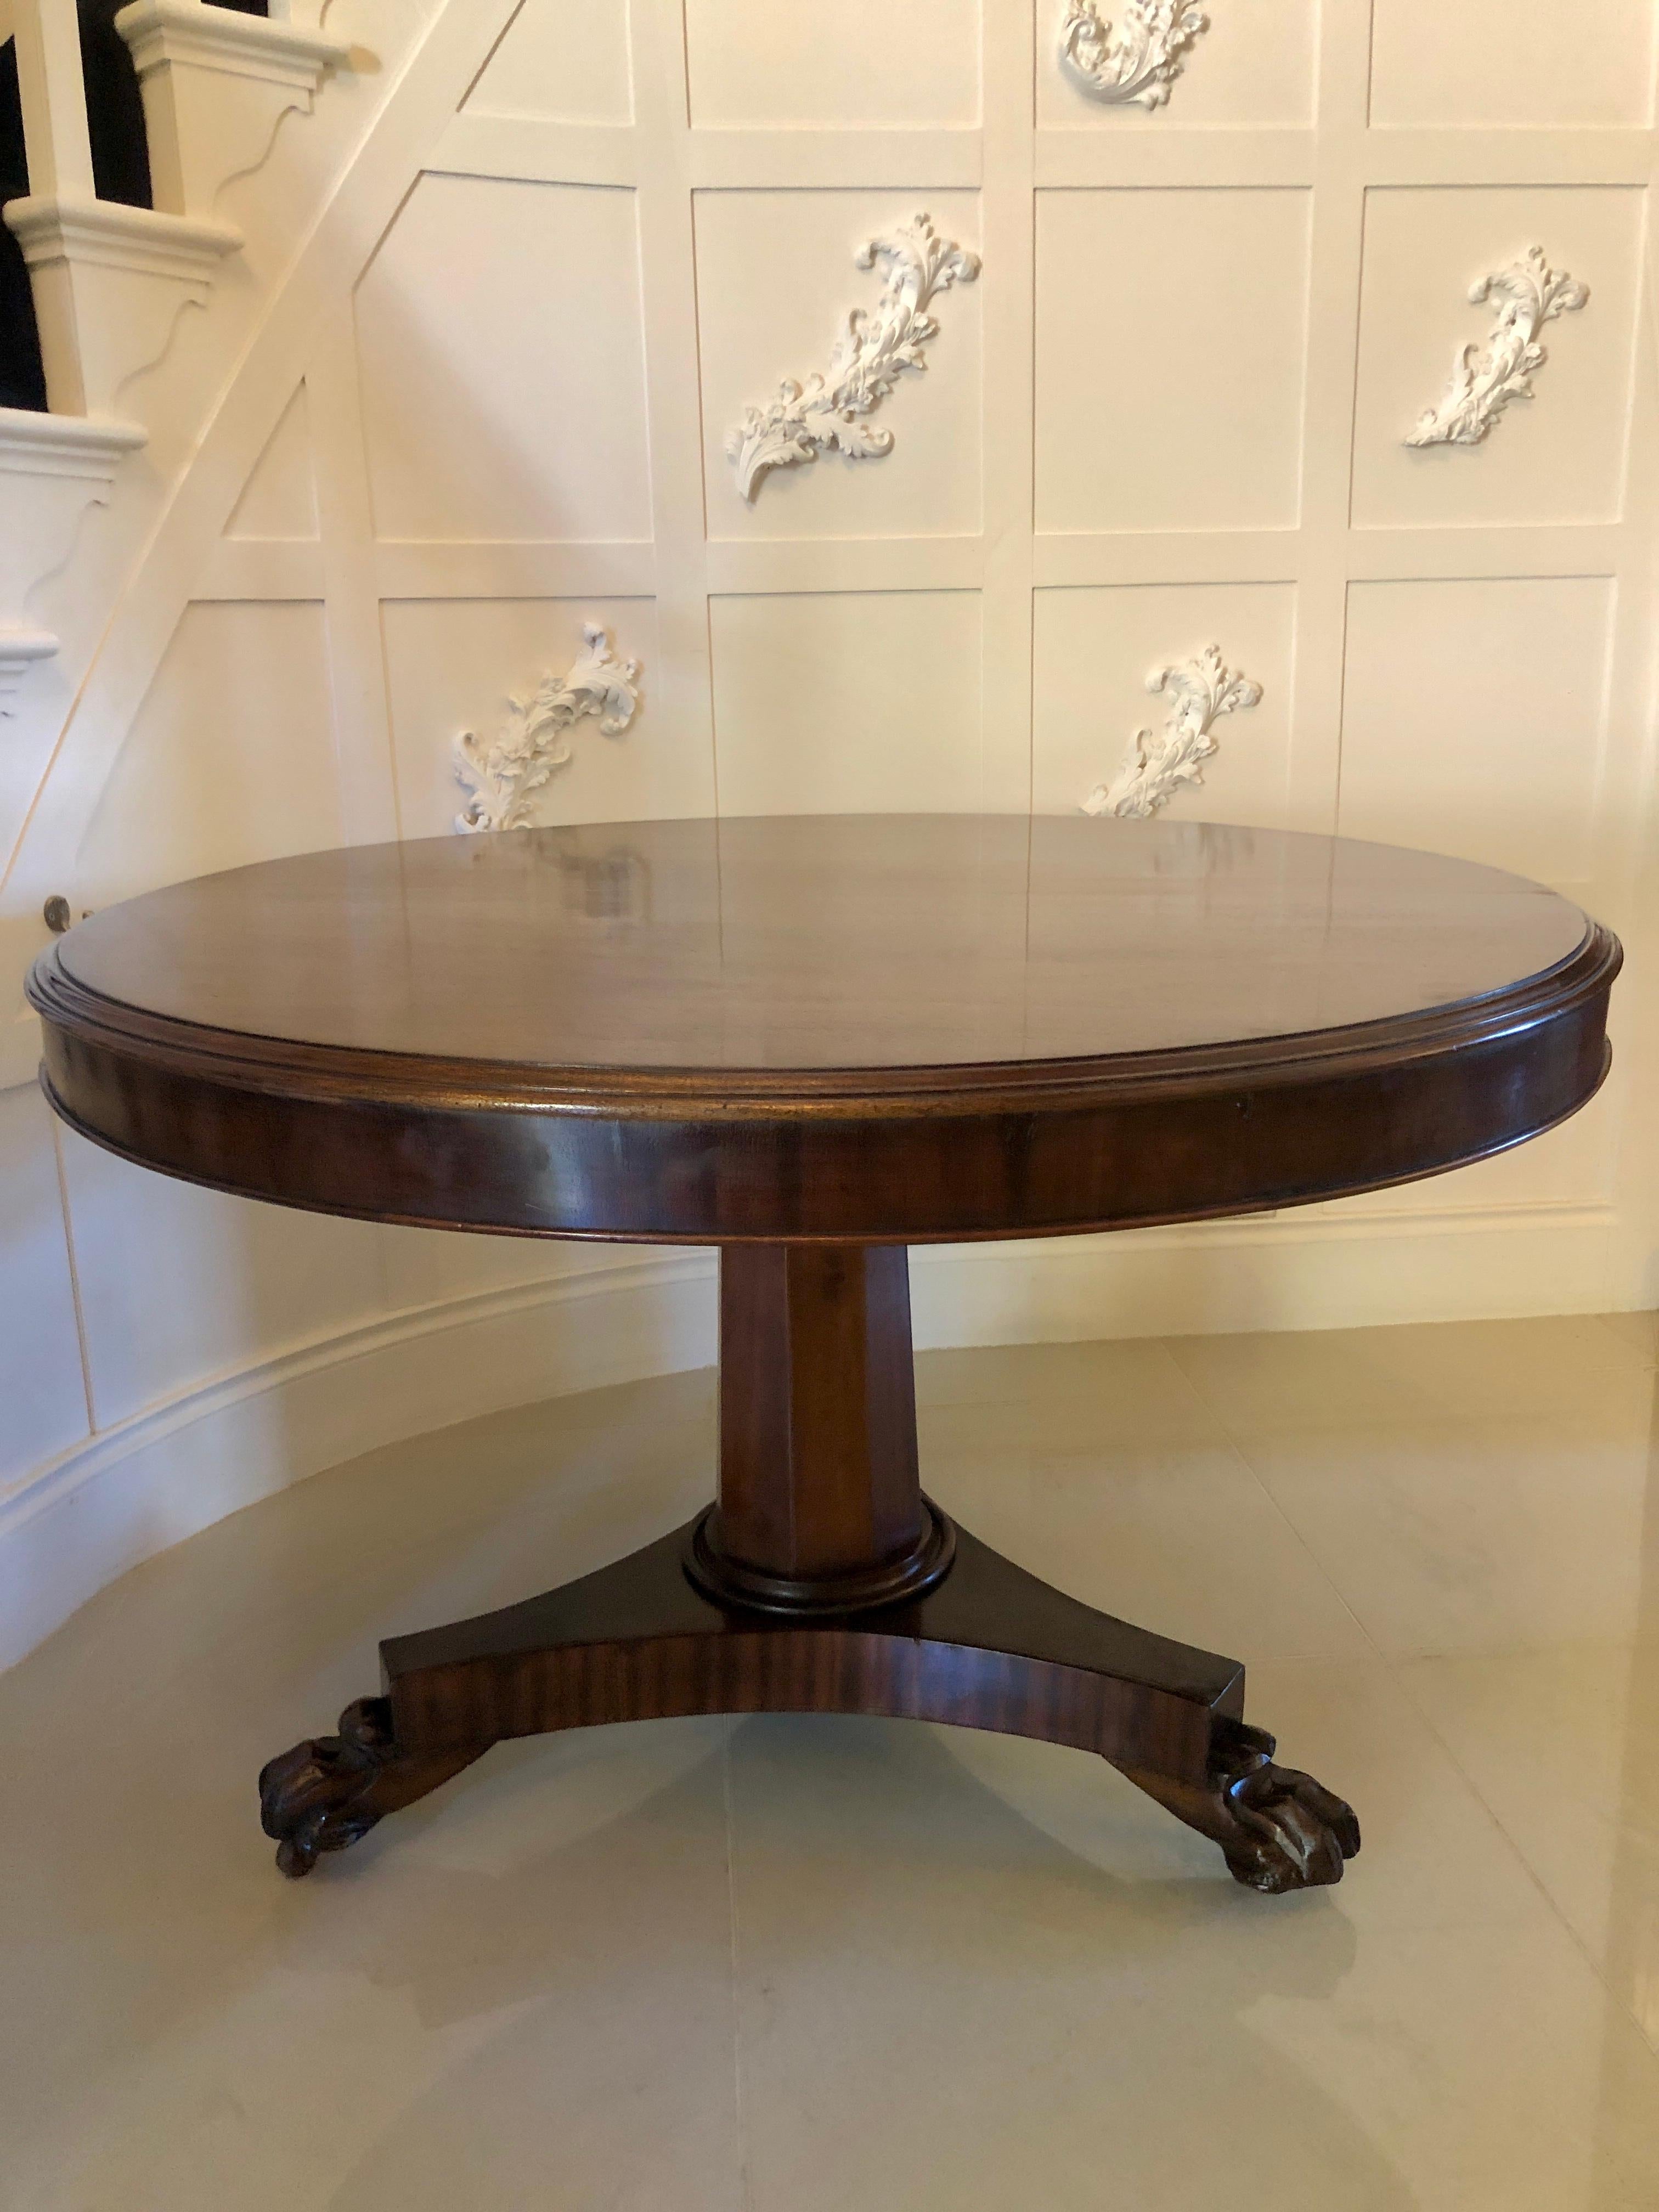 Antique William IV mahogany circular centre table having a quality mahogany top with a thumb moulded edge supported by an attractive octagonal shaped mahogany column. It stands on a shaped mahogany platform base raised by quality carved paw feet on